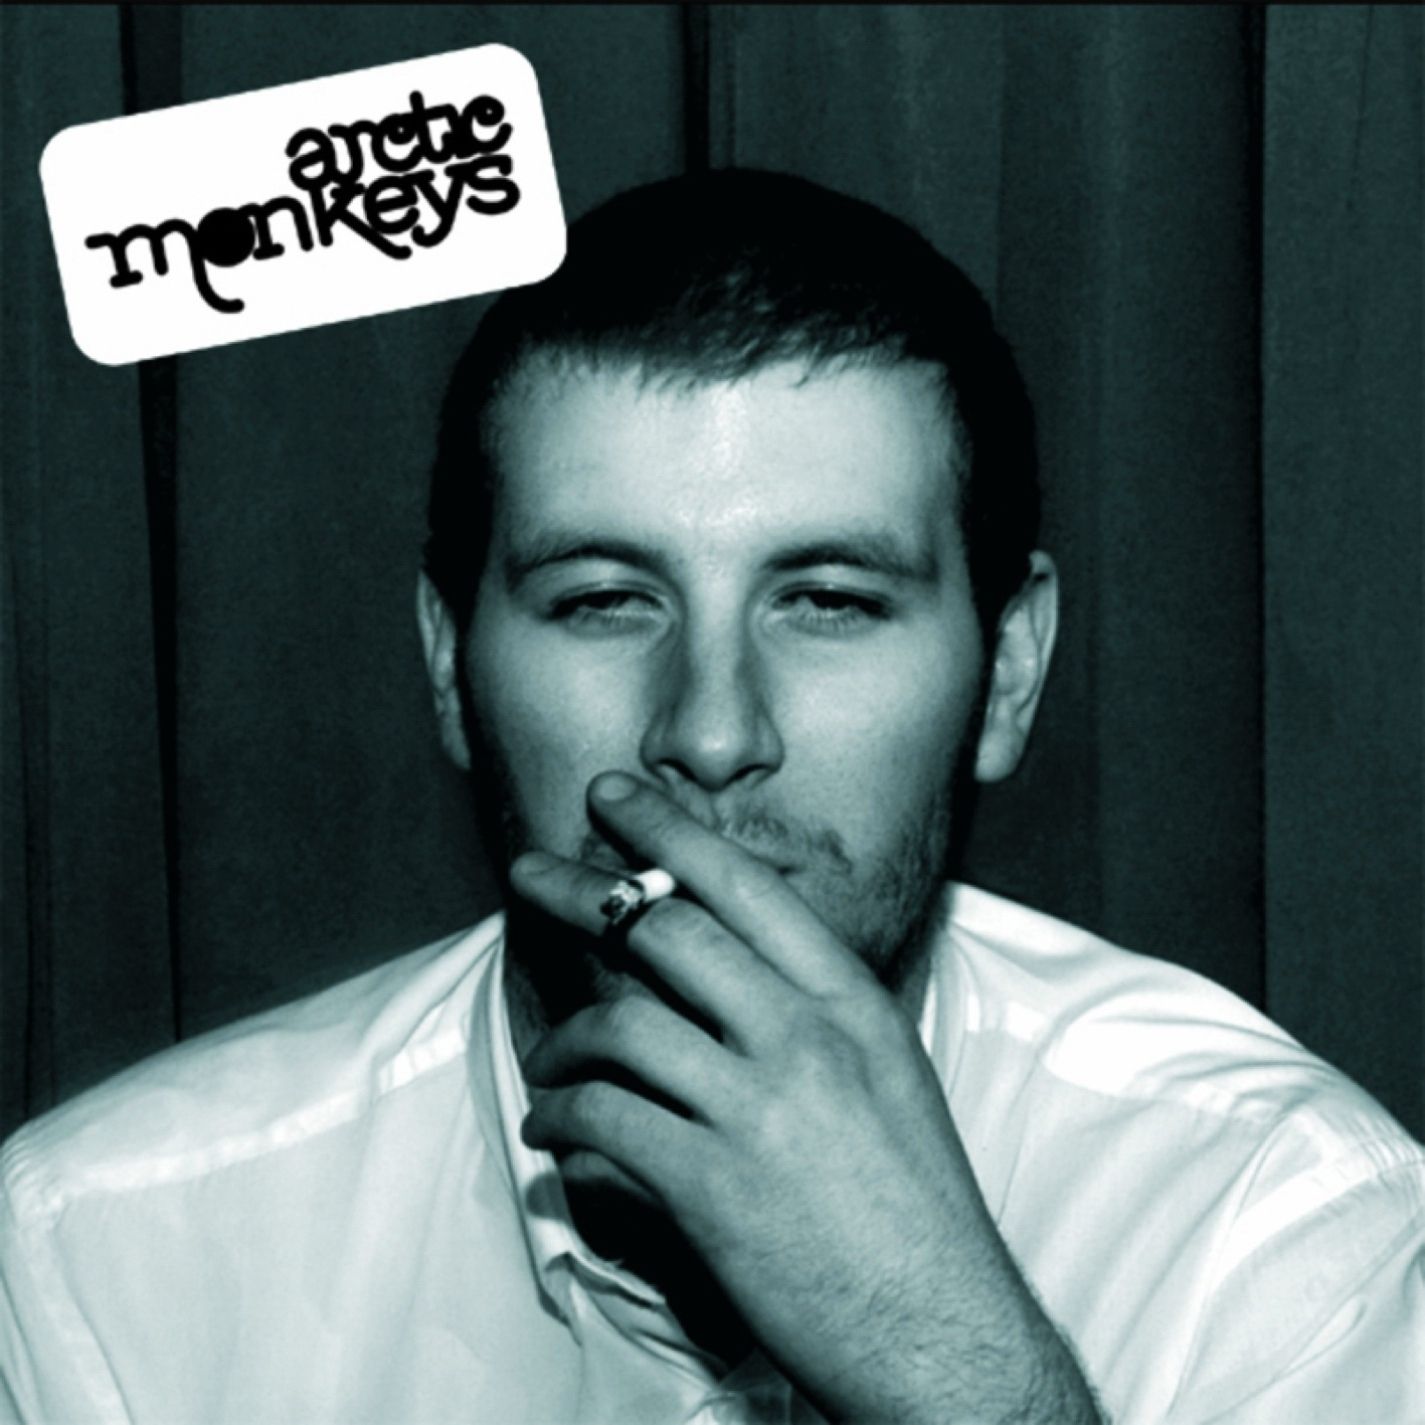 10 years of 'Whatever People Say I Am That's What I'm Not', by the Arctic Monkeys